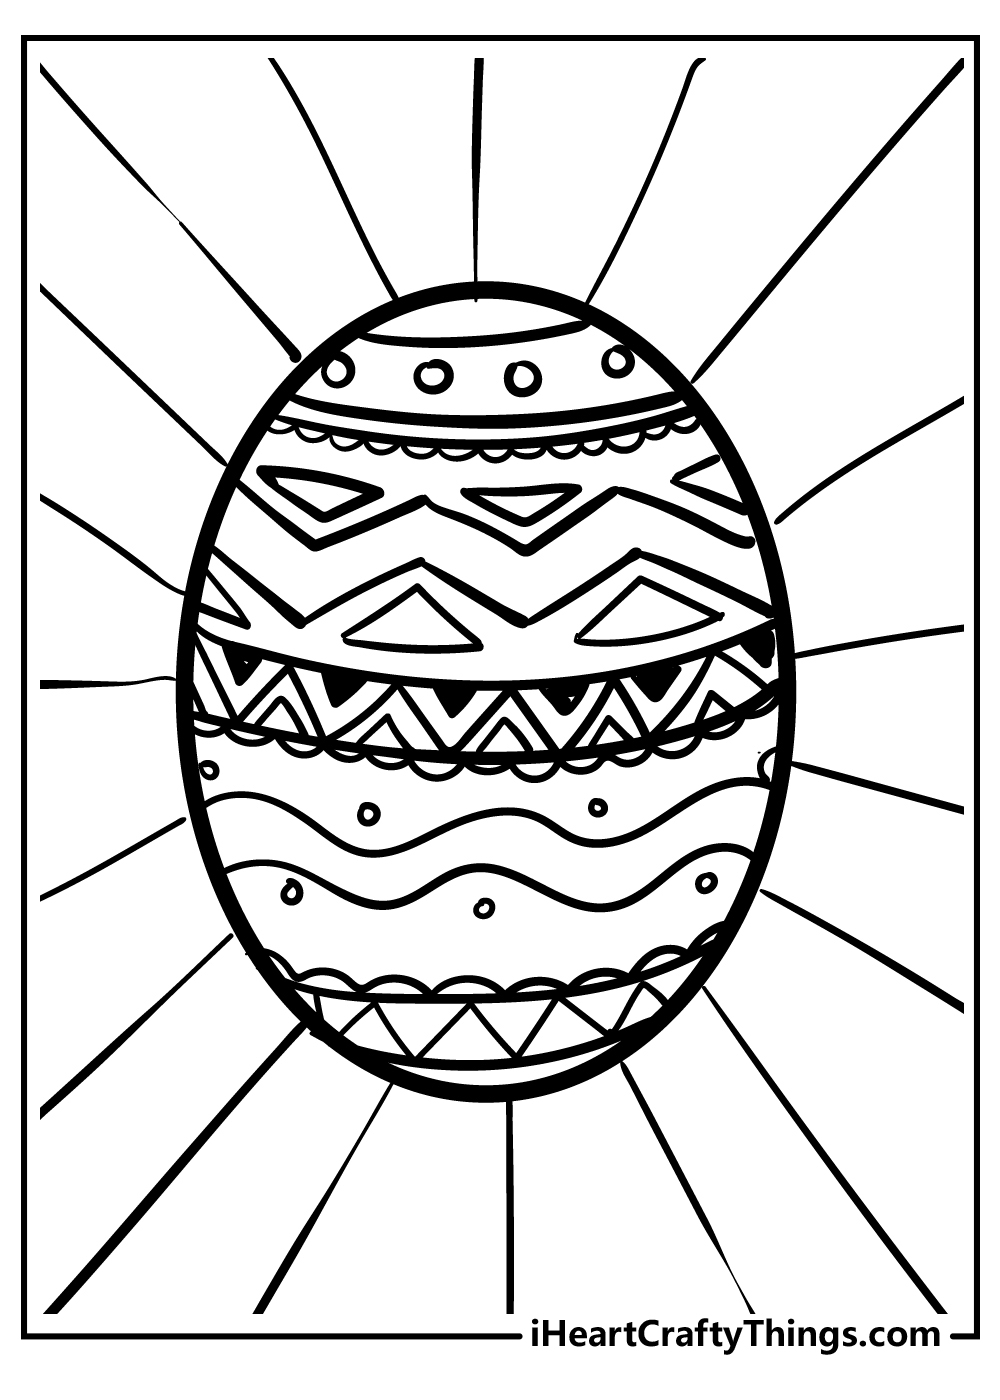 Easter egg coloring pages free pdf download